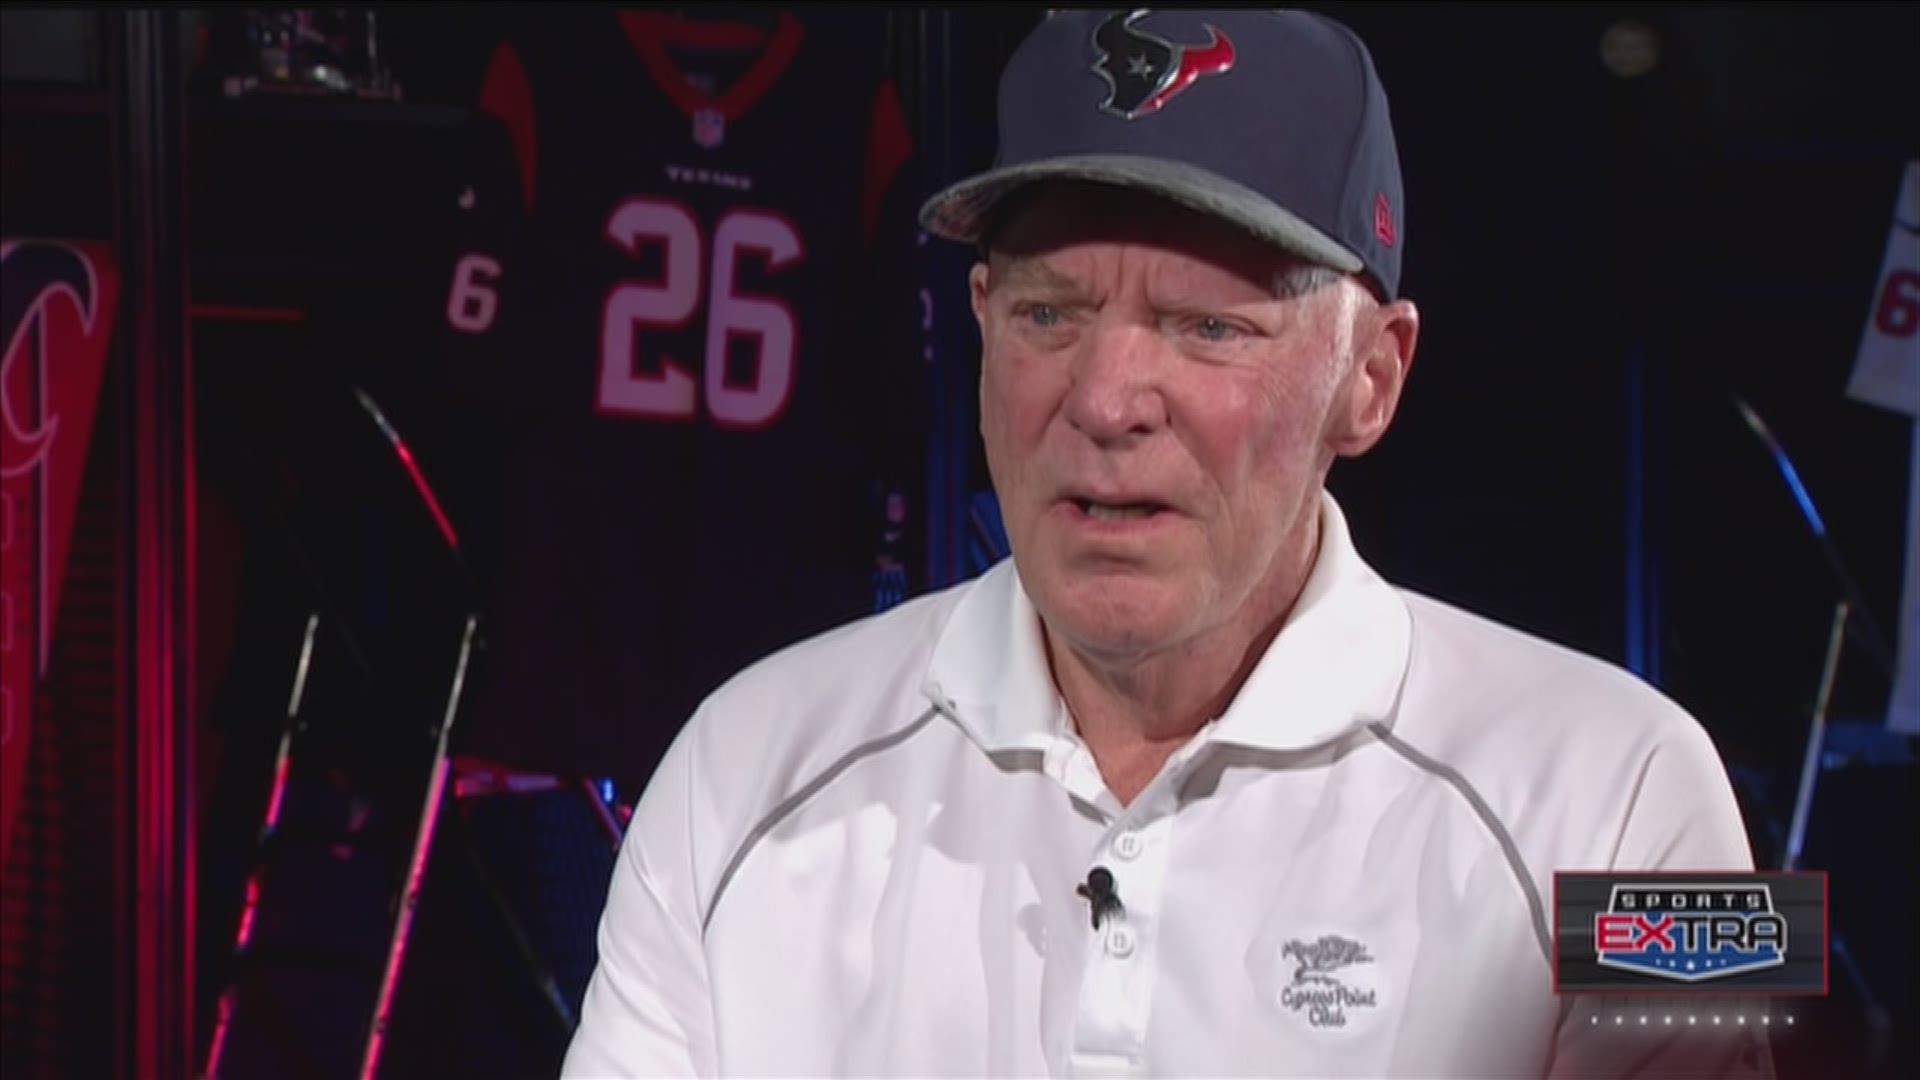 Houston Texans owner Bob McNair reflects on Bob Allen, his working relationship with him and his admiration for Bob's charity work.